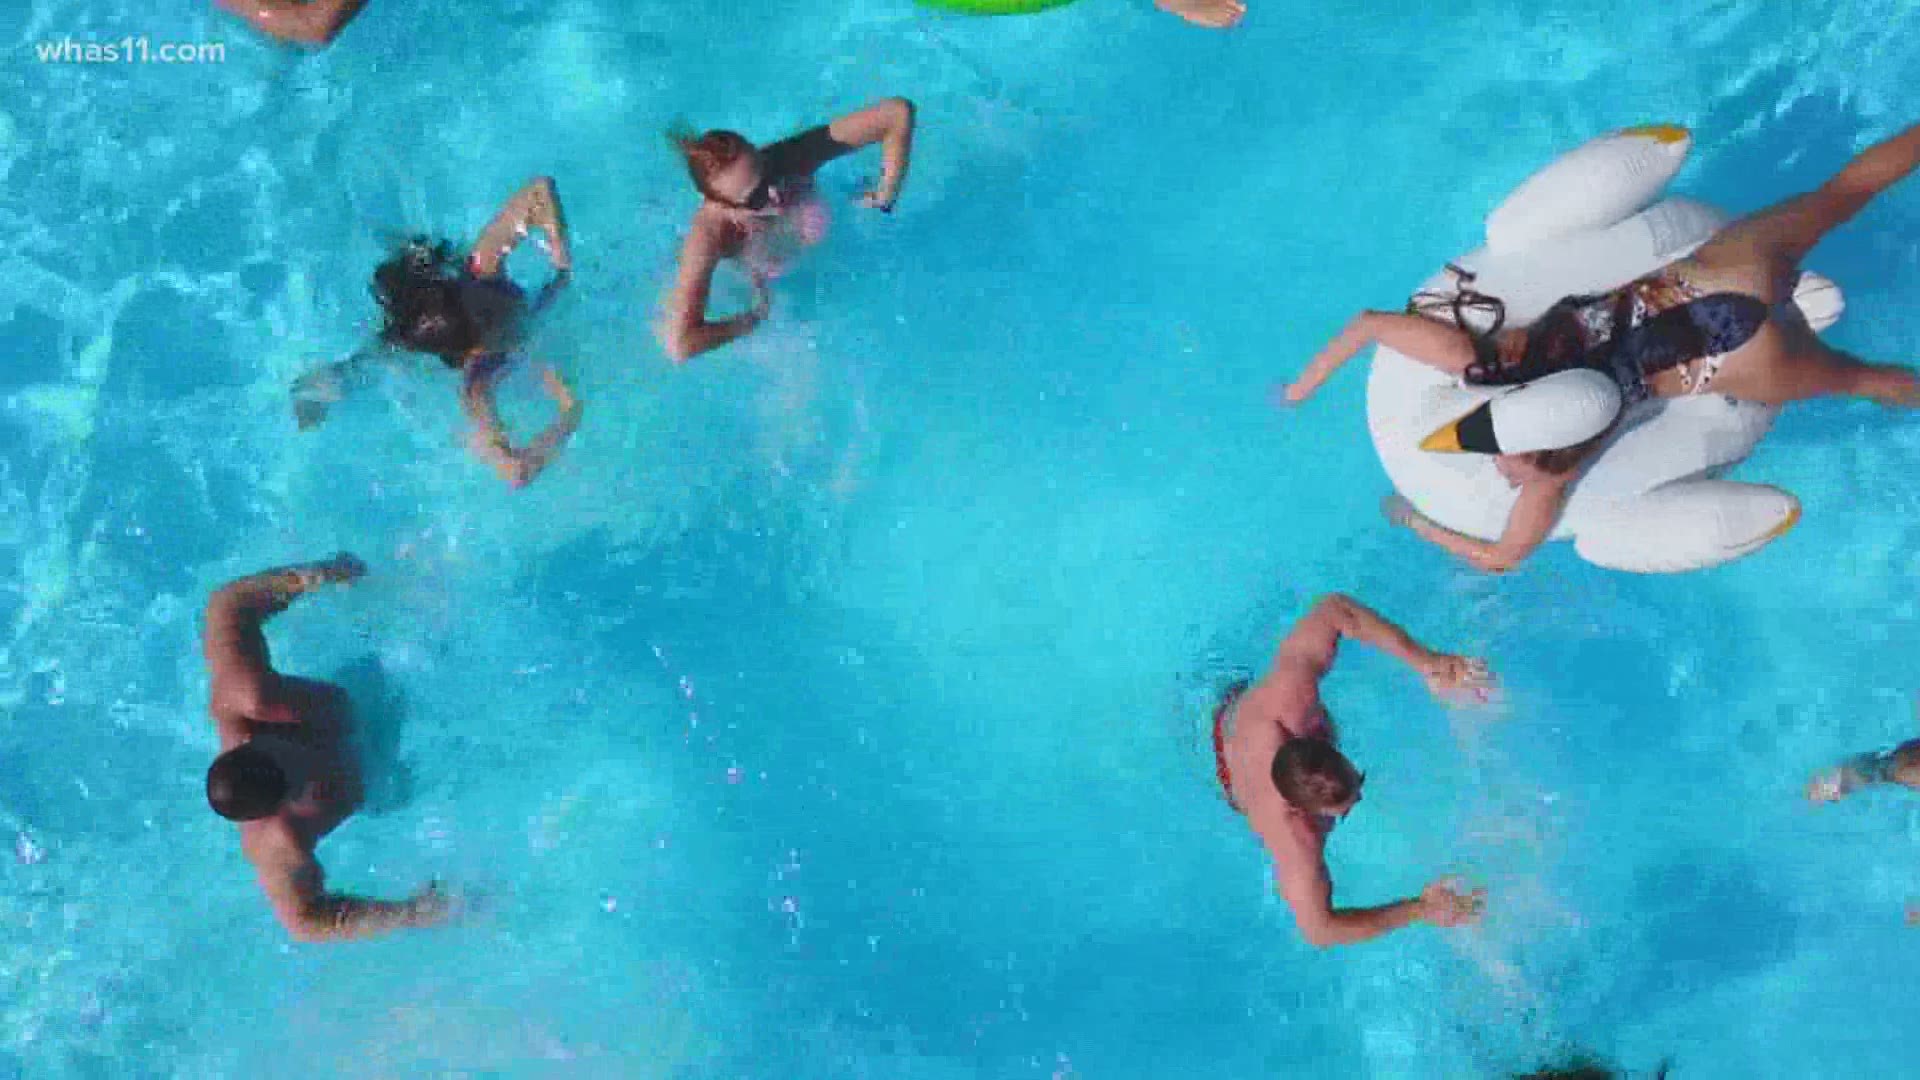 Some savvy homeowners have used a new app to rent out their pools to and bring in extra cash.